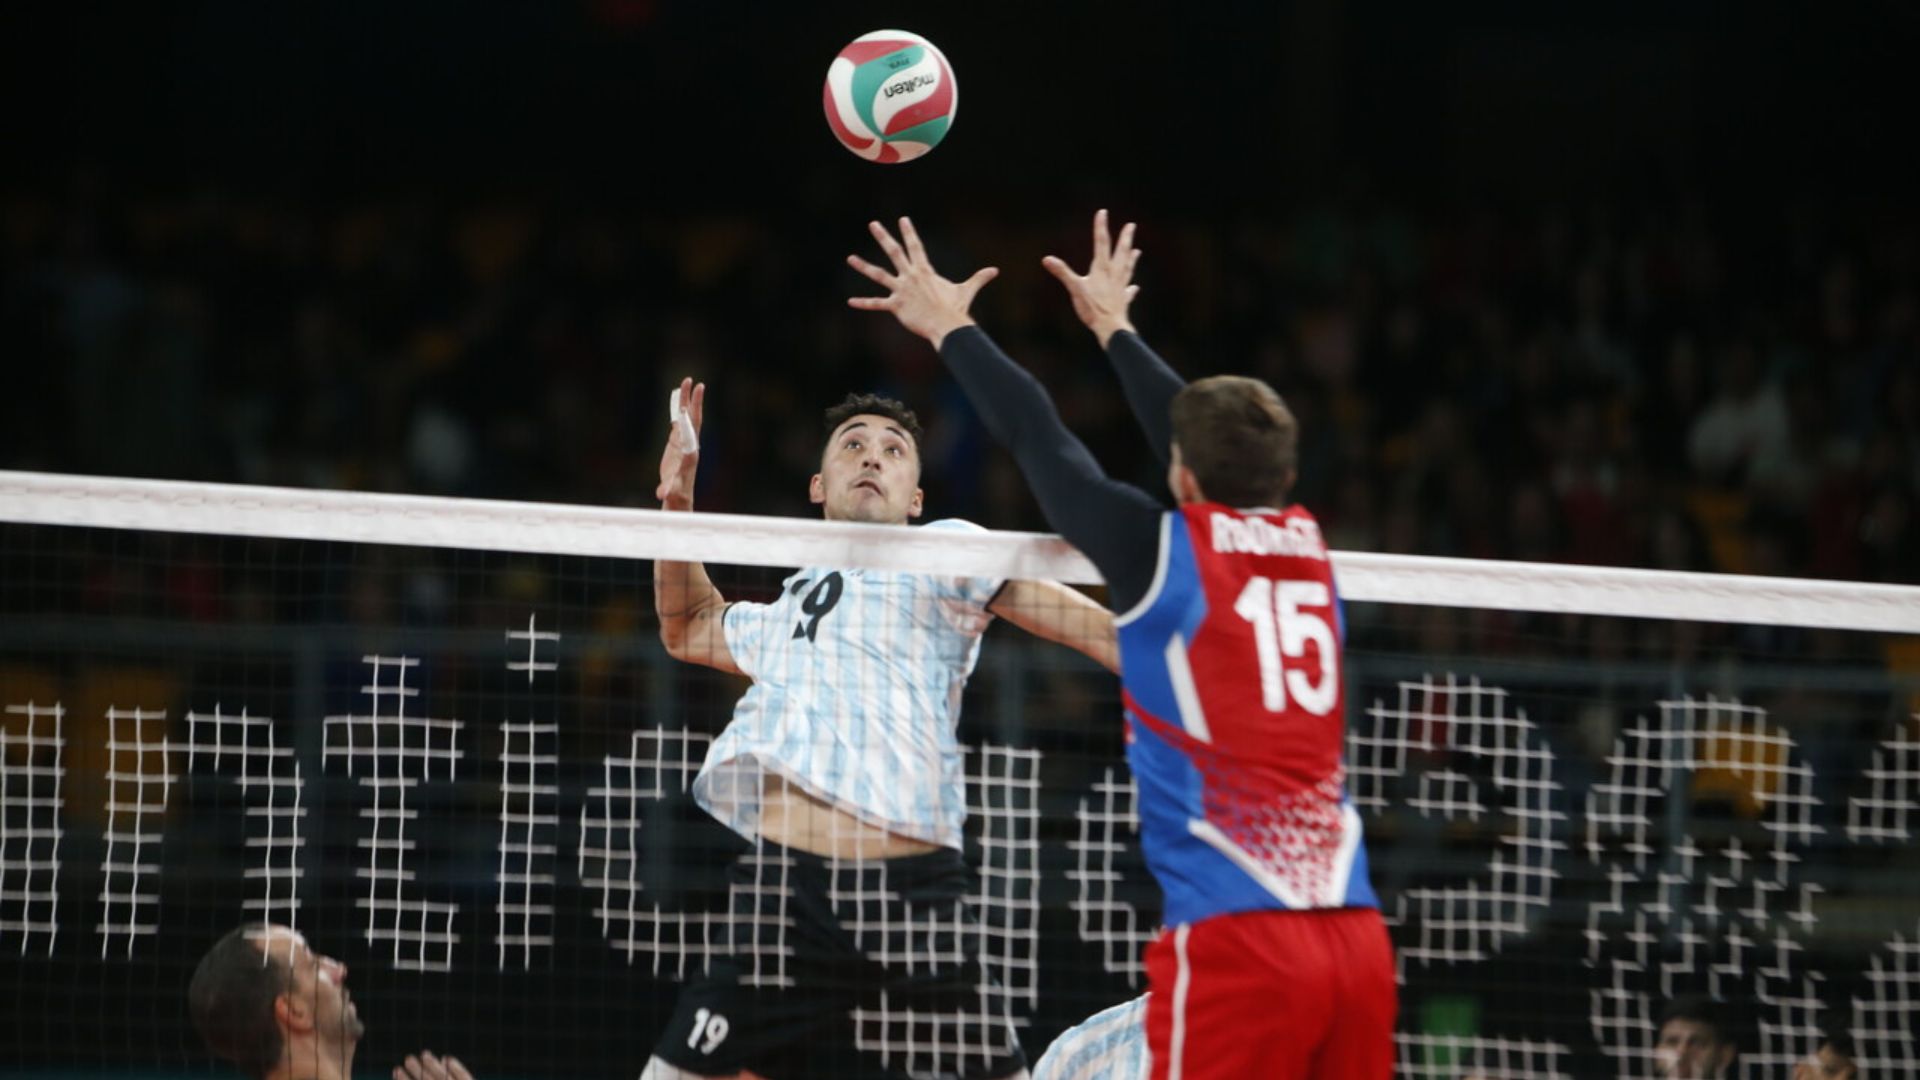 Argentina defeated Puerto Rico in a thrilling match in male's volleyball